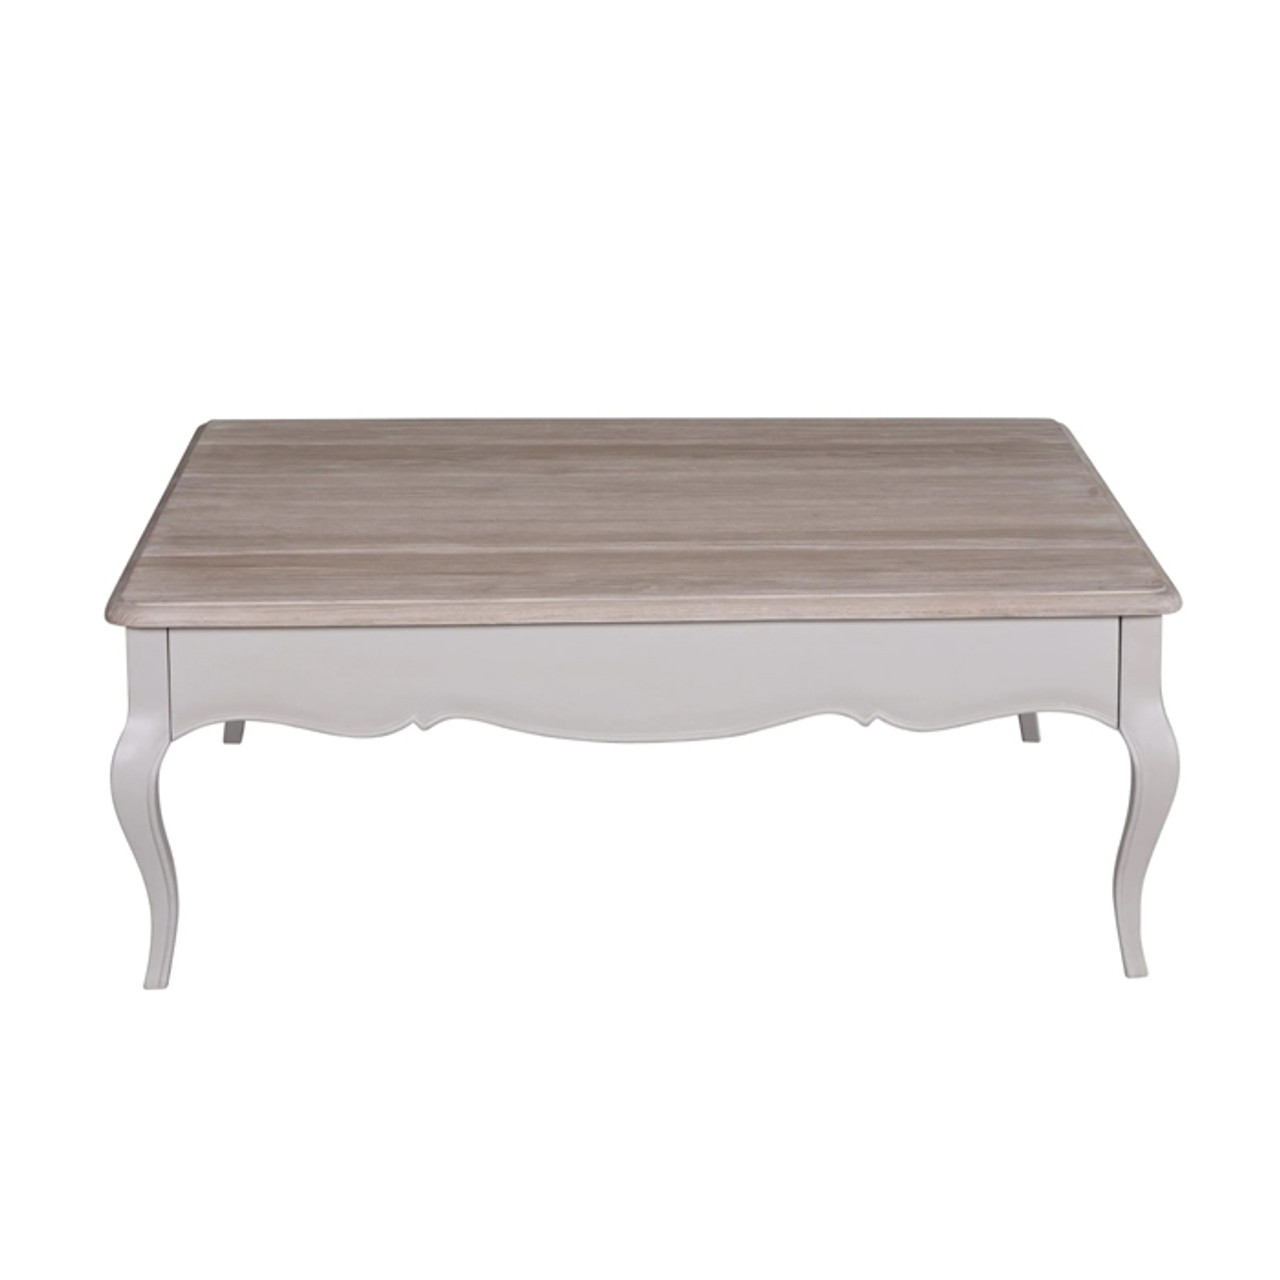 4ft Selene Square Coffee Table with Drawer – Hardwick/Rustic Brown